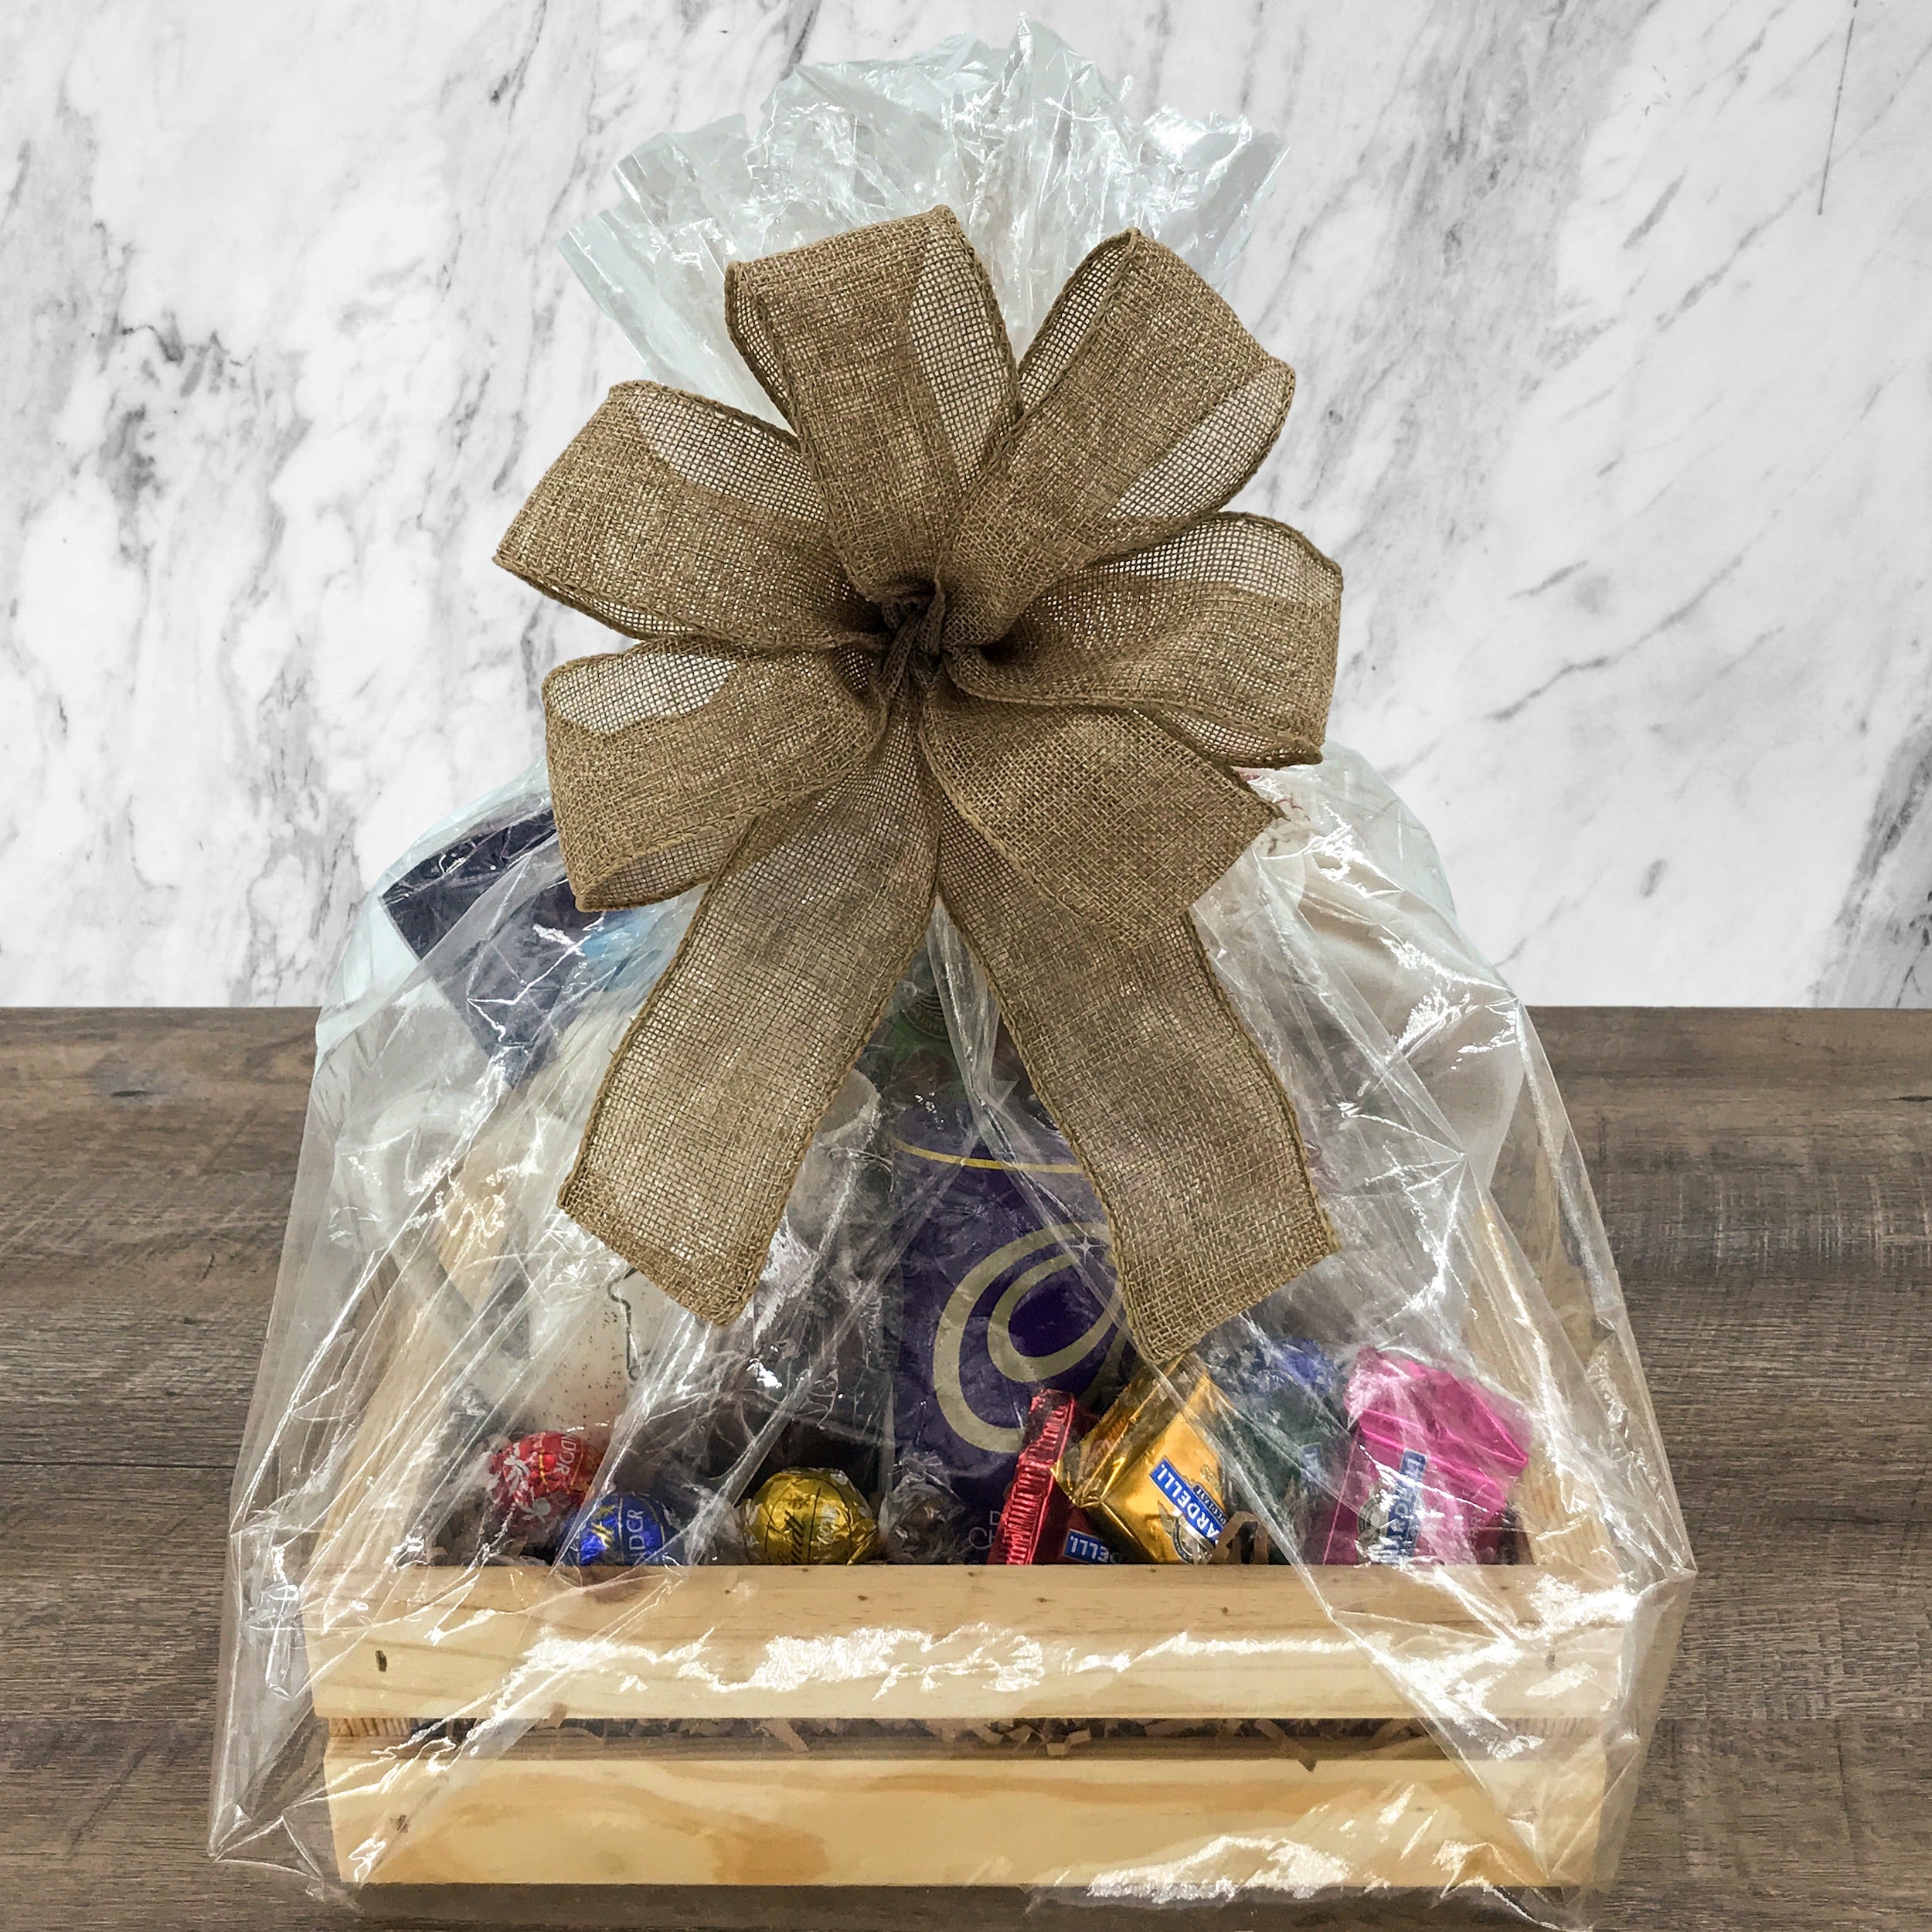 3 Ways to make a gift basket look expensive – Carpenter Core